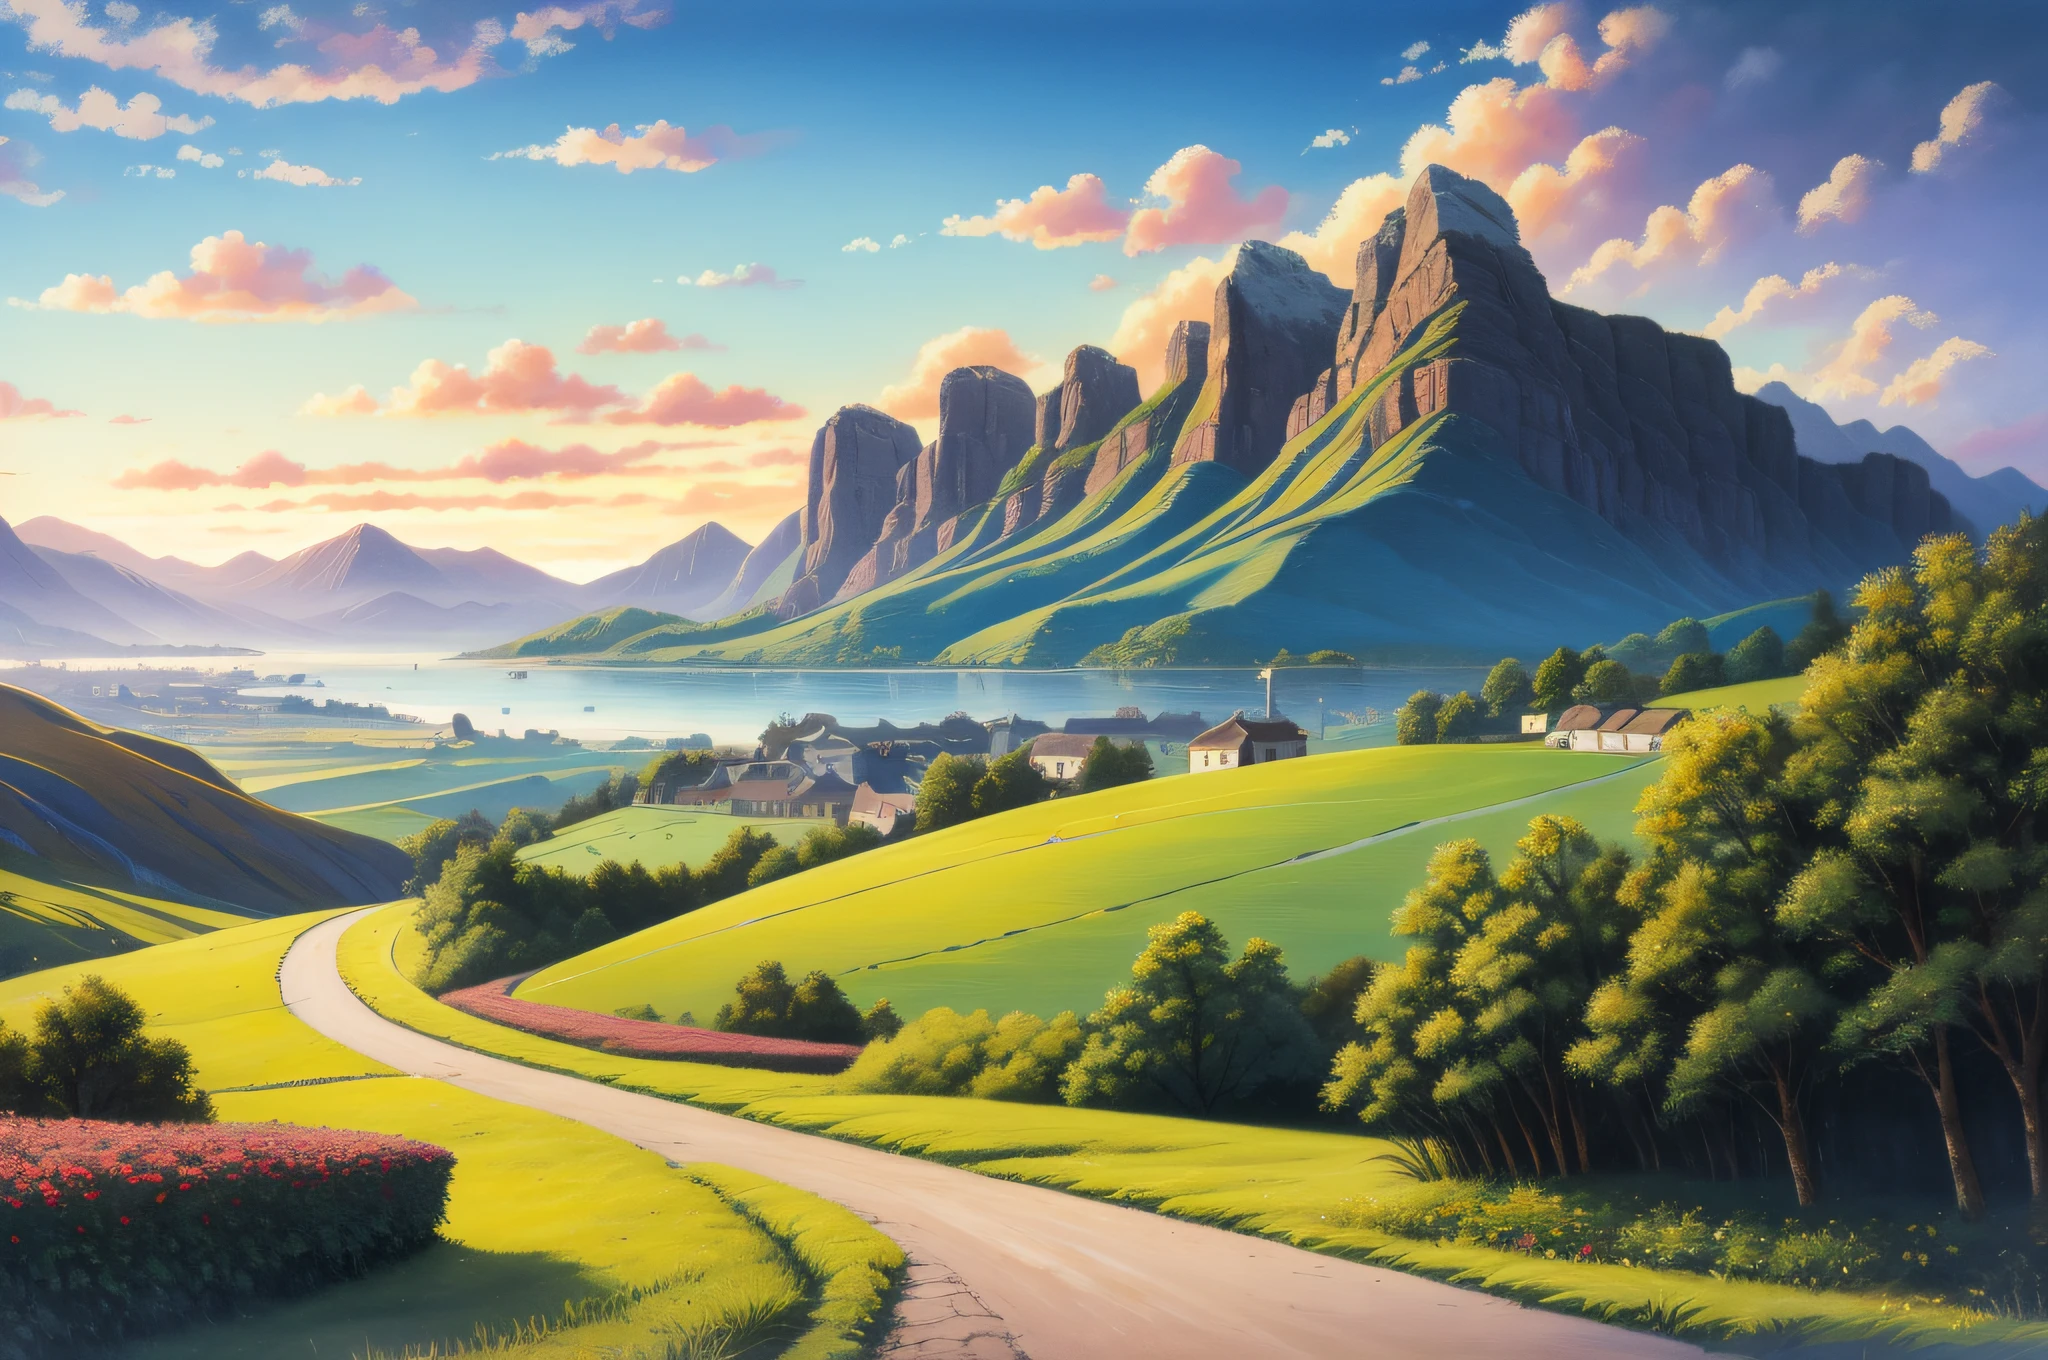 best quality, high resolution, distinct image, oil painting (medium), highly detailed, dmt,
countryside, rolling hills, lazy village, chimney smoke, Mountains in distance, cloudy sky, detailed sky. blue ocean